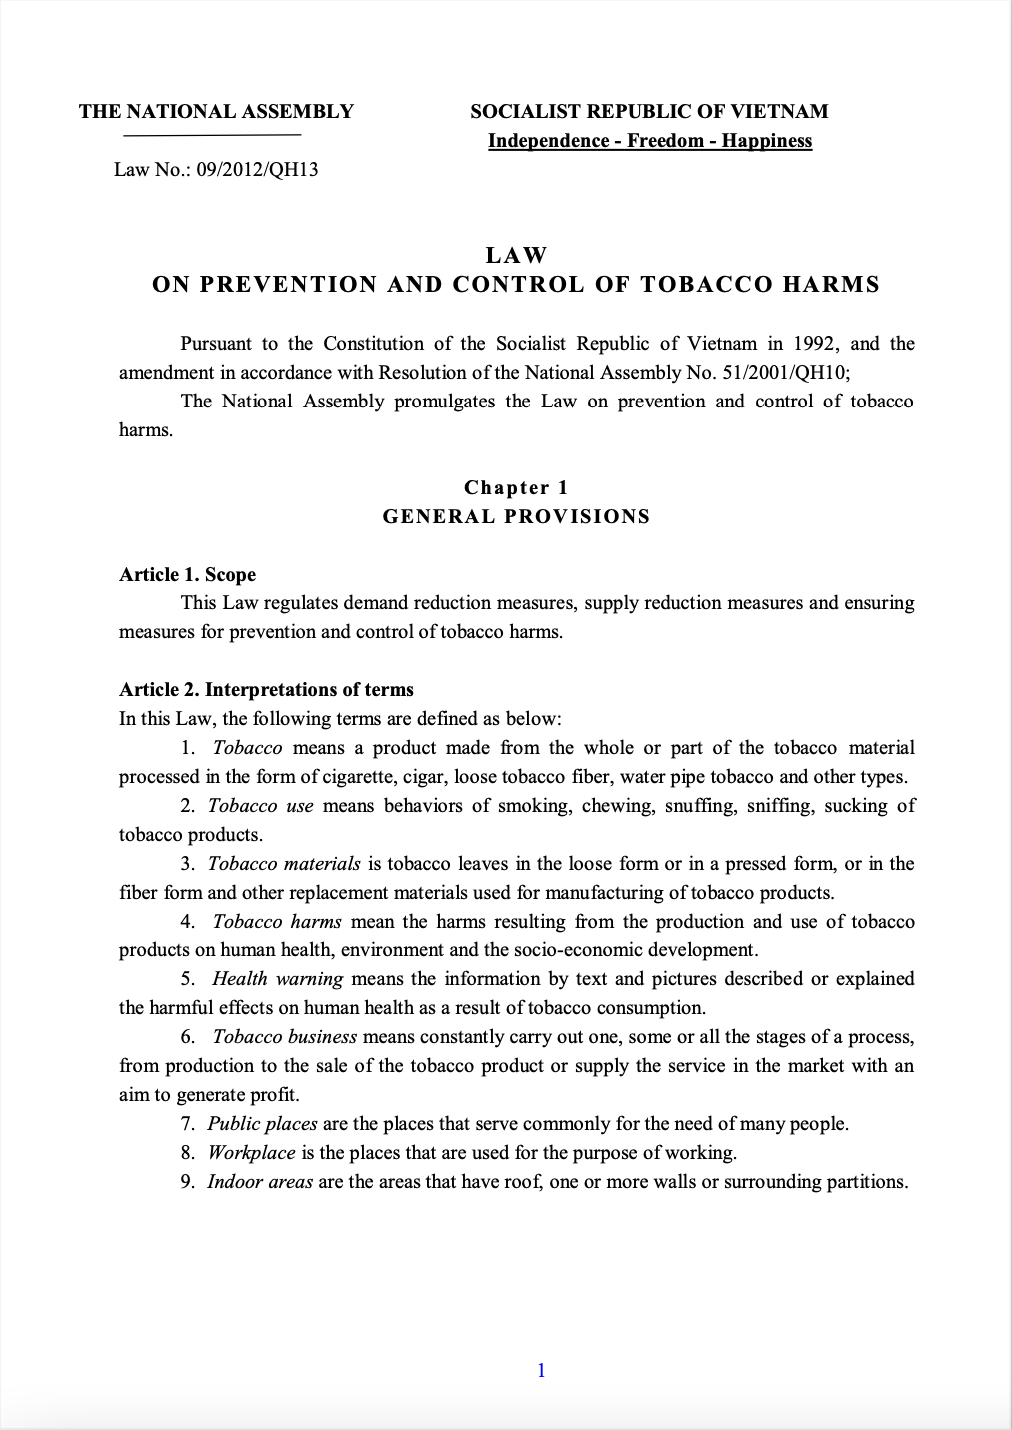 Vietnam Law on Prevention and Control of Tobacco Harms 2012